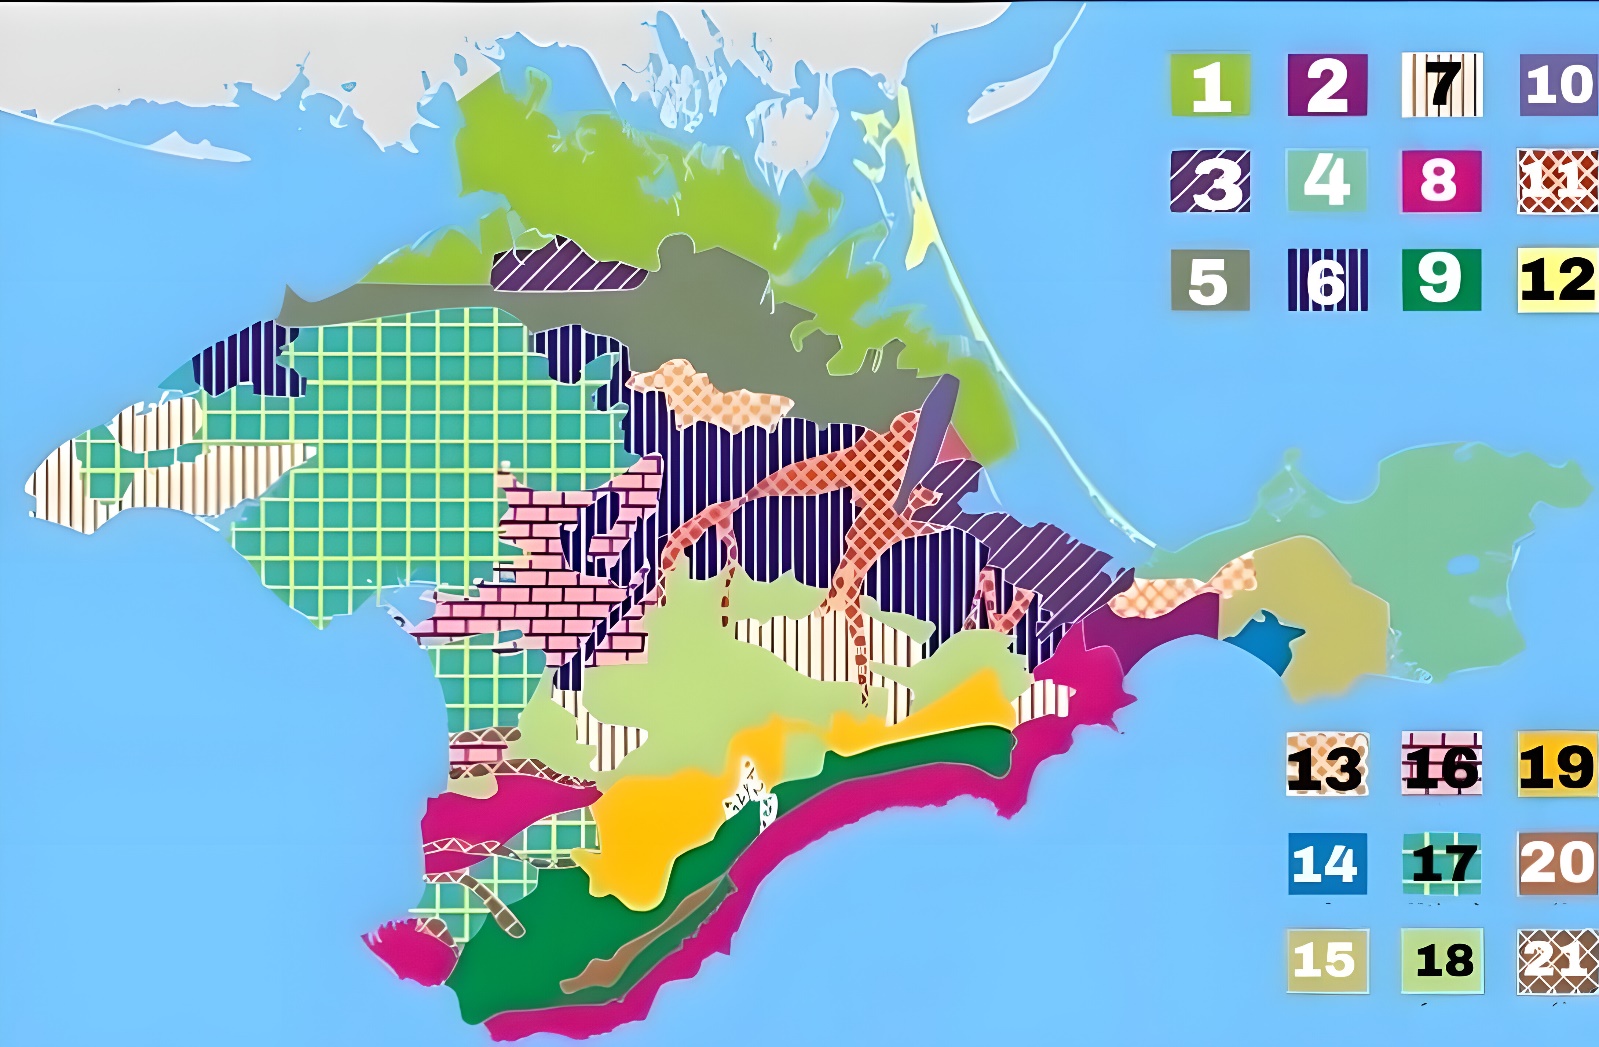 Soils of the Republic of Crimea (according to I.Ya. Polovetsky and P.G. Gusev)